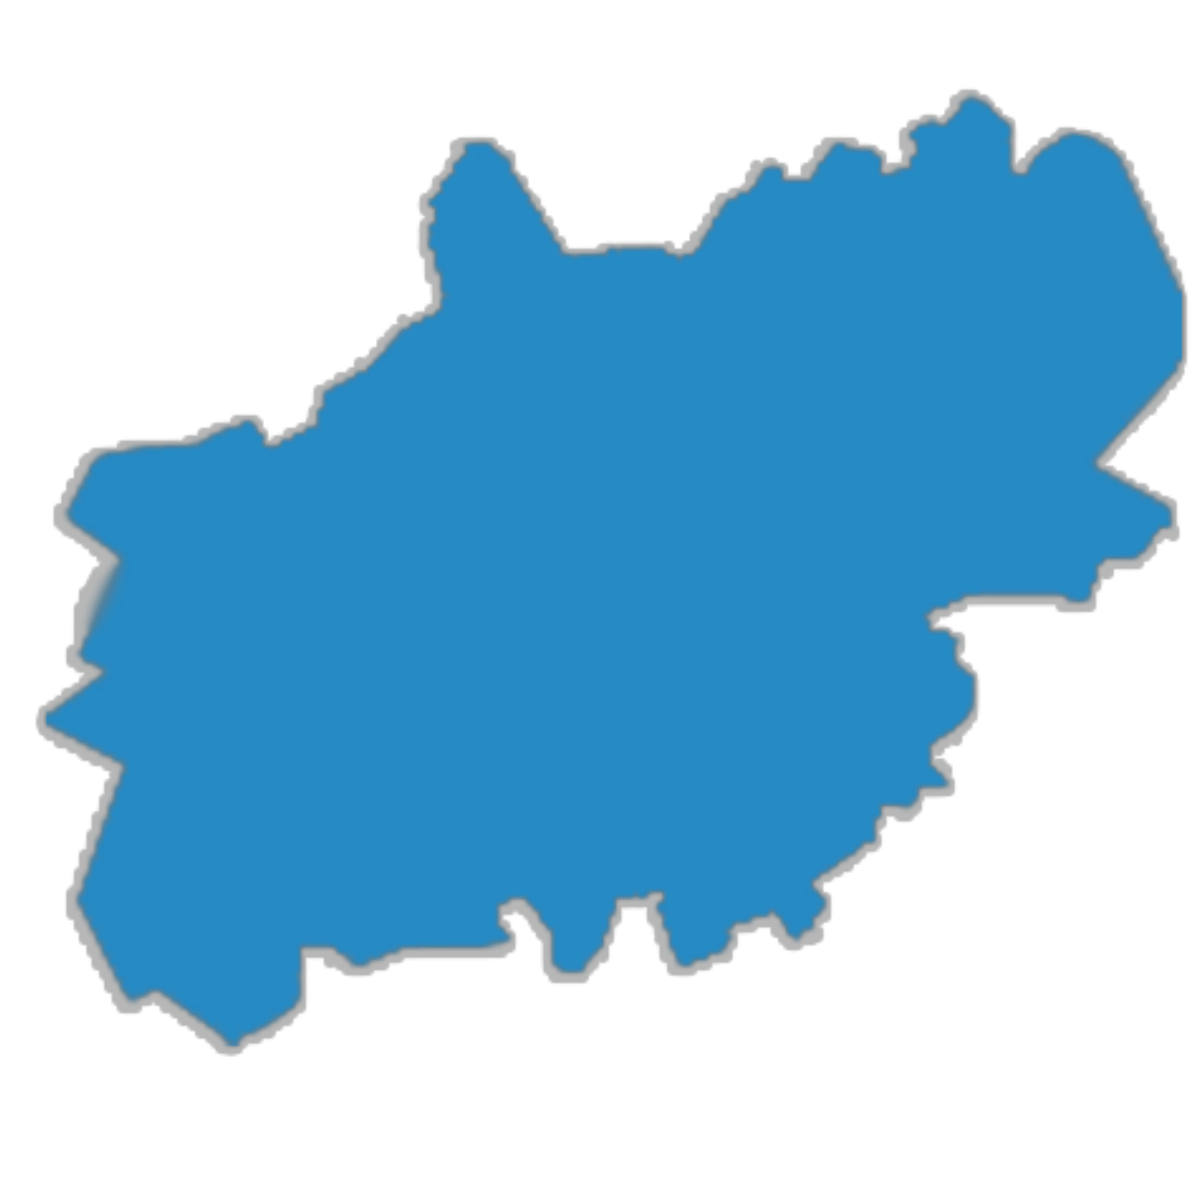 image of the Midlands, Nottingham and Derby